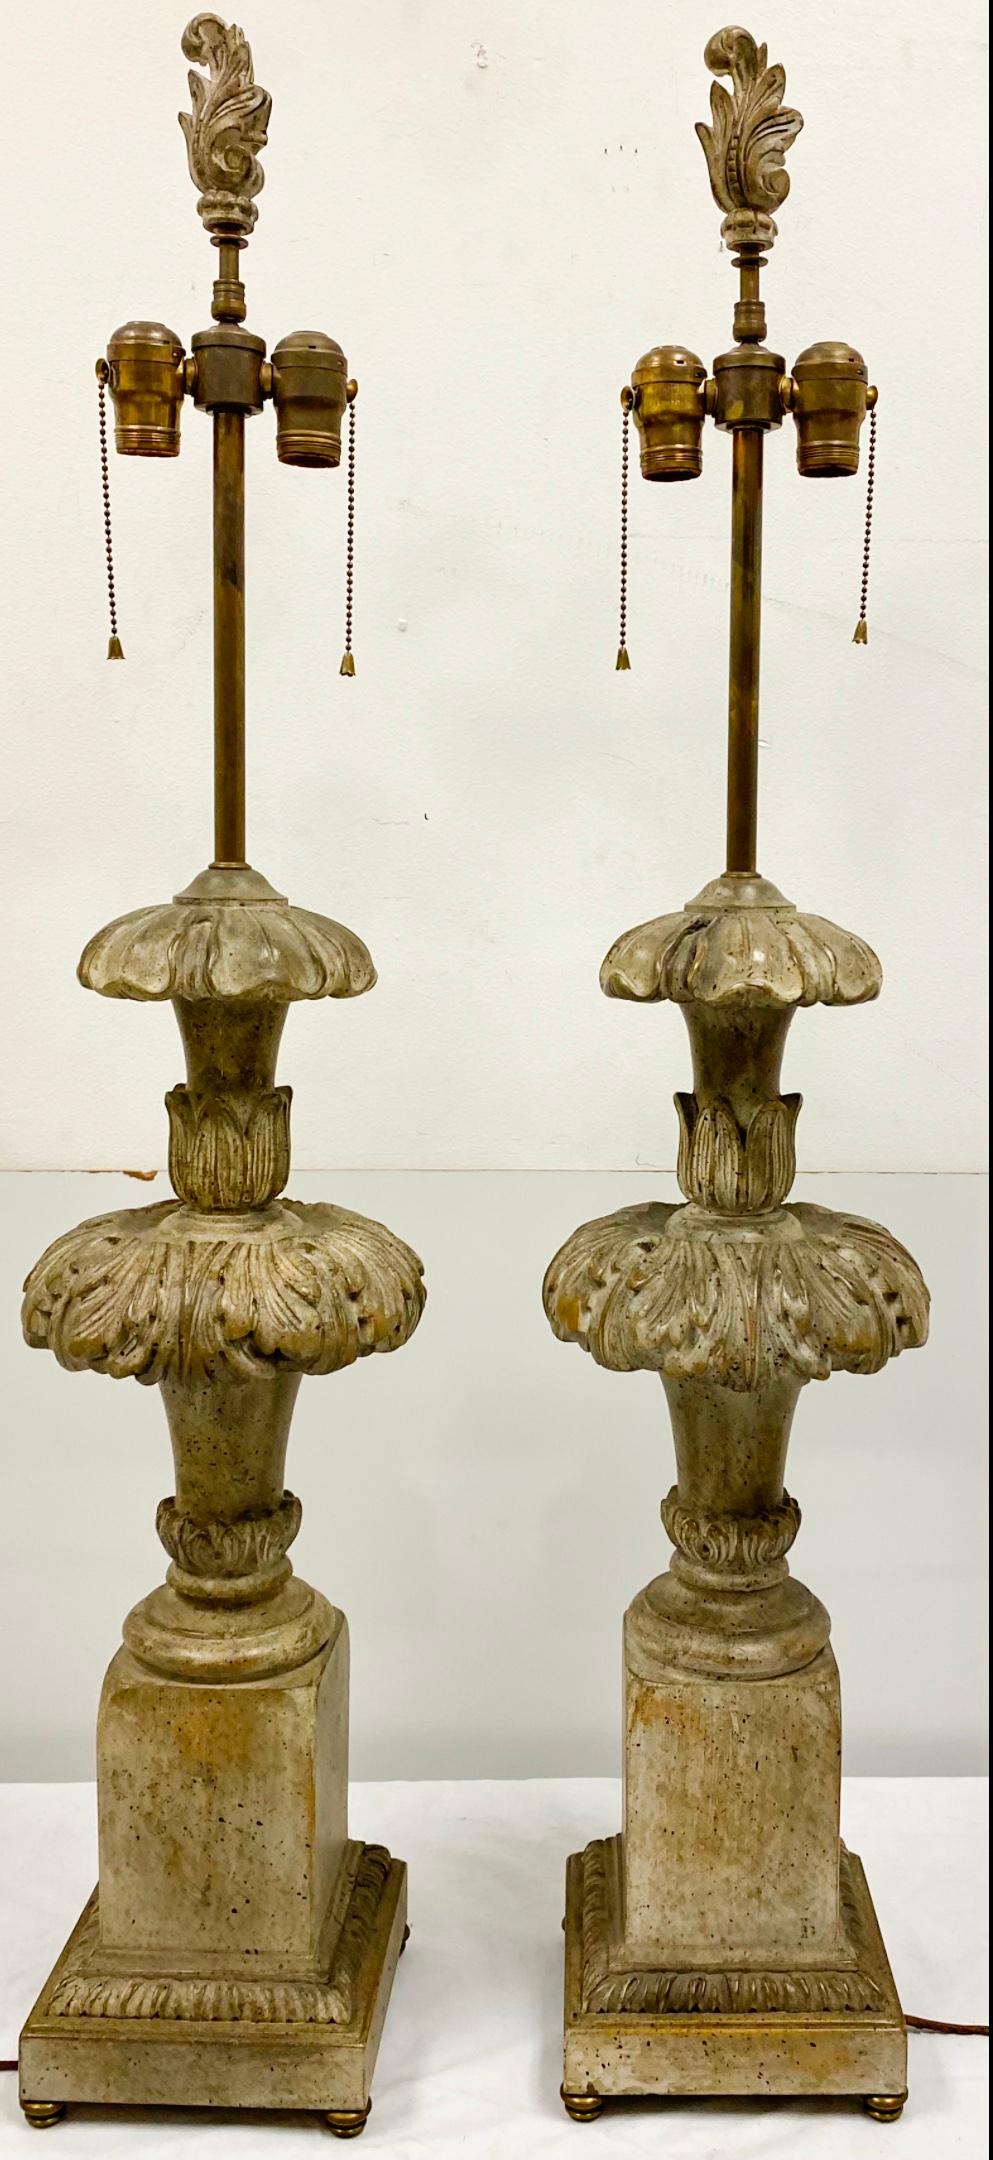 20th Century 1940s Italian Regency Style Carved Wood Lamps, a Pair